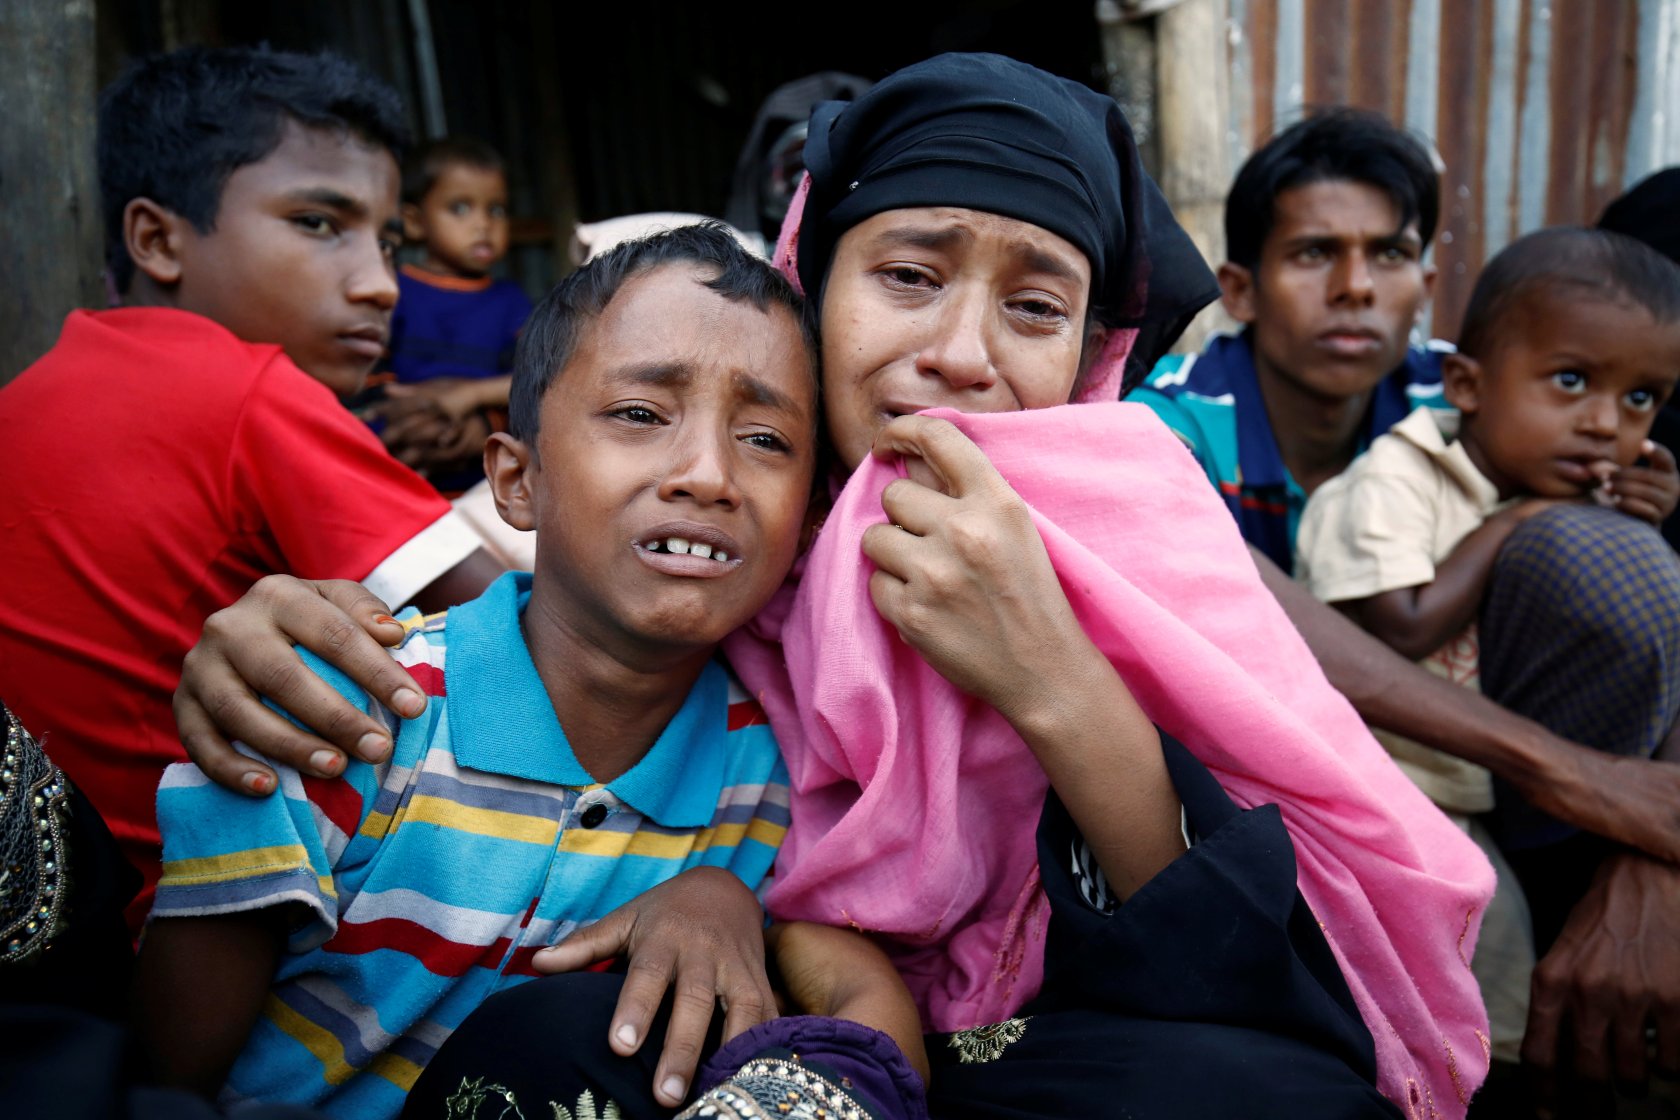 A Rohingya Muslim woman and her son cry after being caught by Border Guard Bangladesh (BGB) while illegally crossing at a border check point in Coxs Bazar  , Bangladesh, November 21, 2016. REUTERS/Mohammad Ponir Hossain     TPX IMAGES OF THE DAY - RTSSOBB